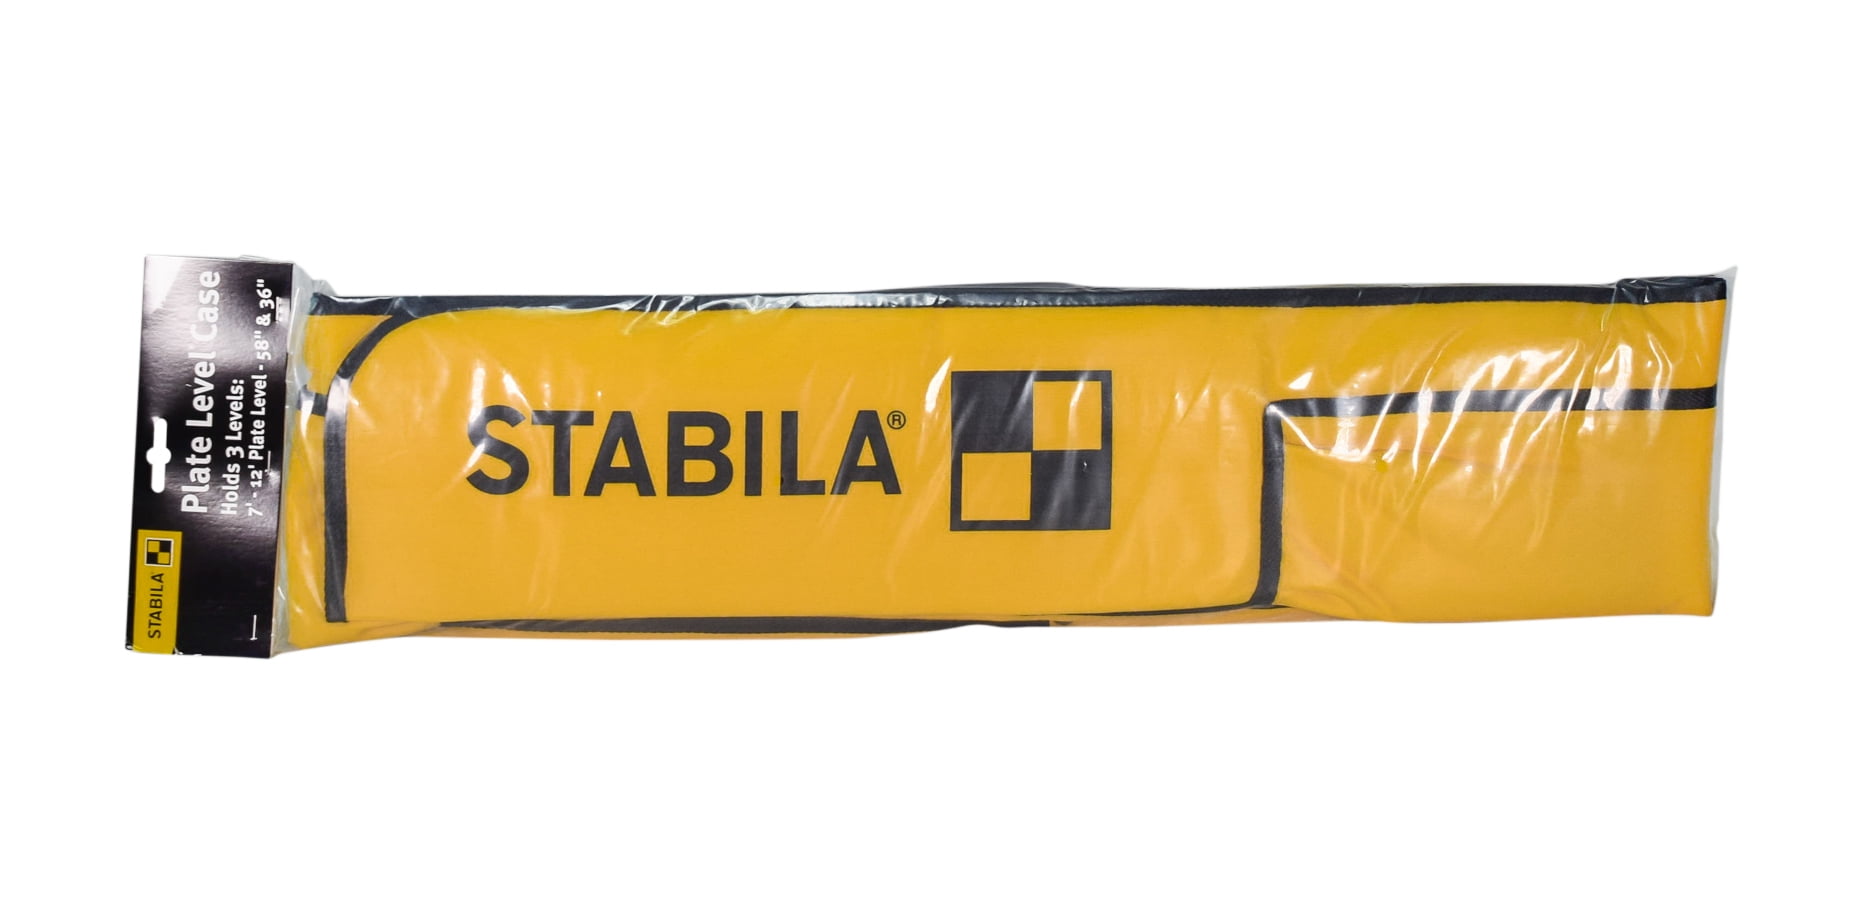 Stabila 30035 Plate Level Case for 7'-12' Plate Level plus 24-Inch, 48-Inch  Level